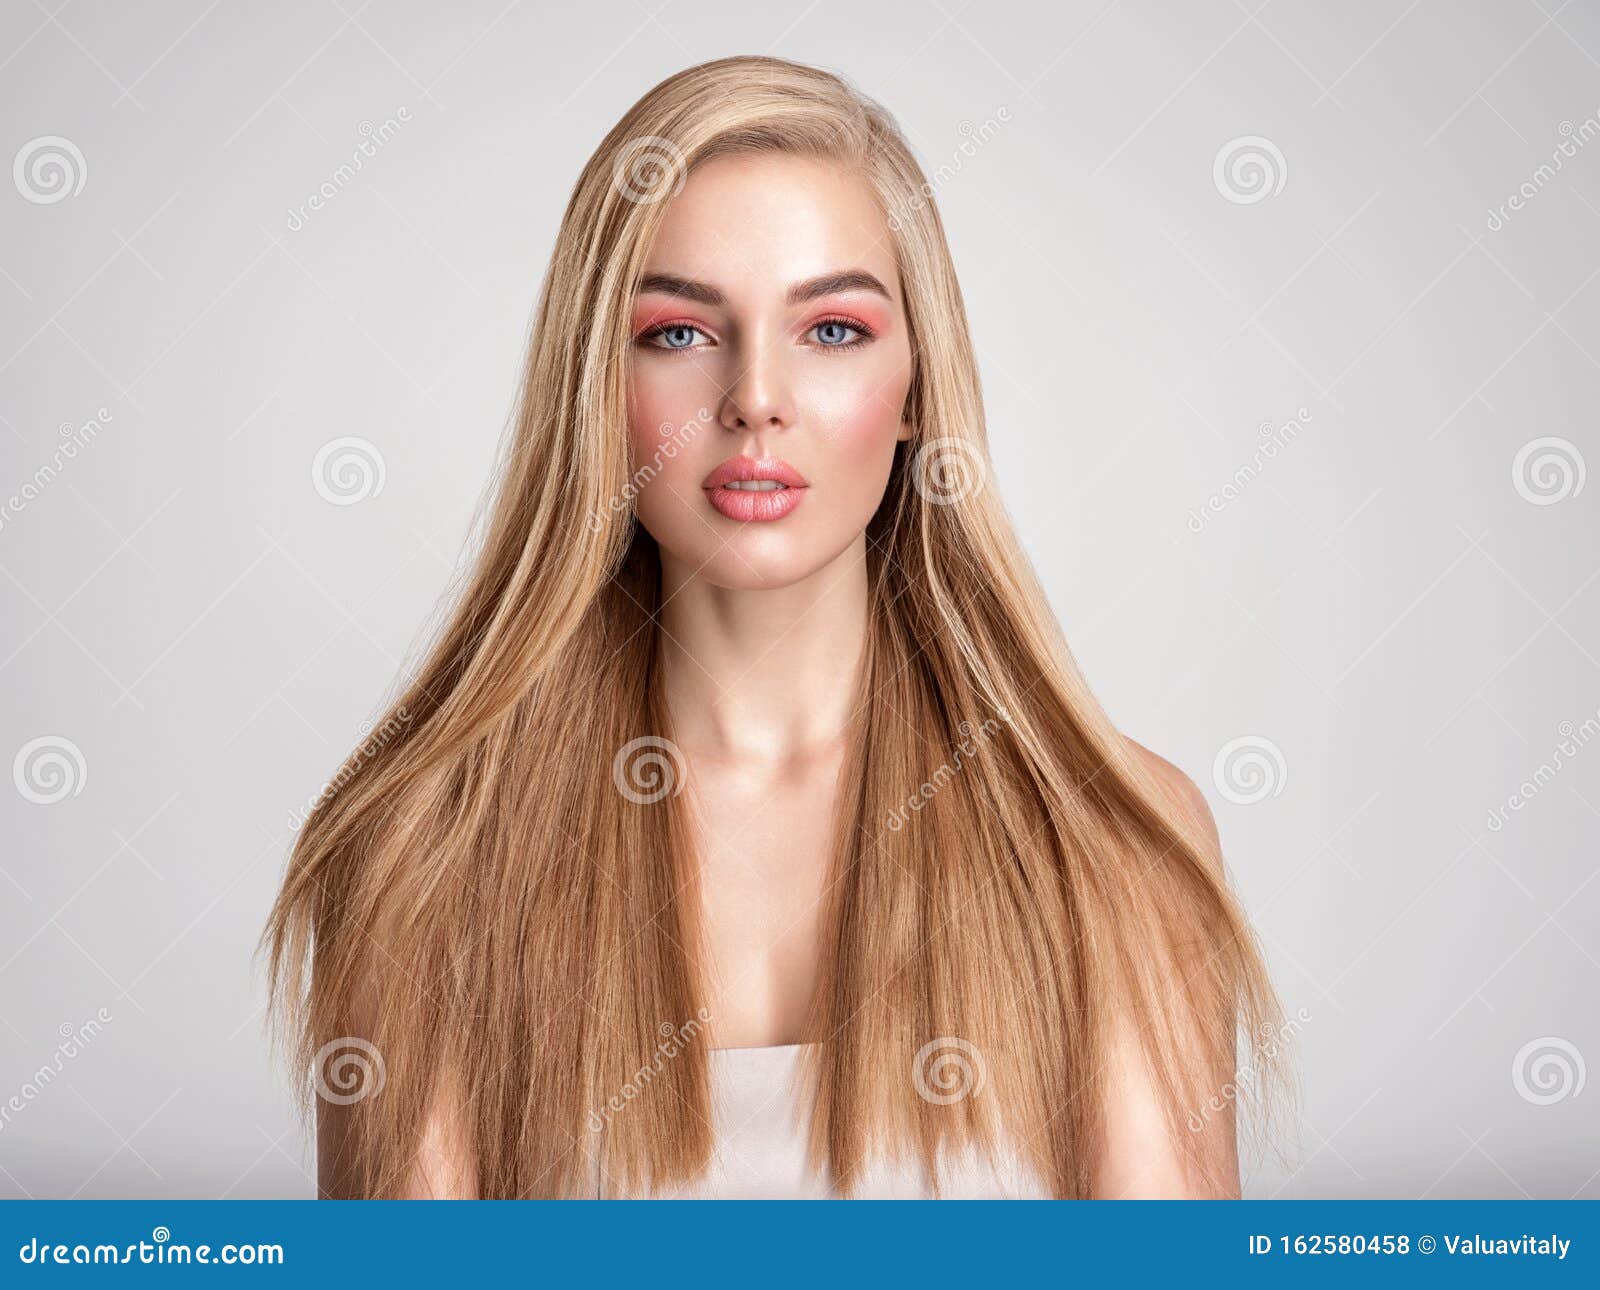 Long blonde hair girl with straight hair - wide 2